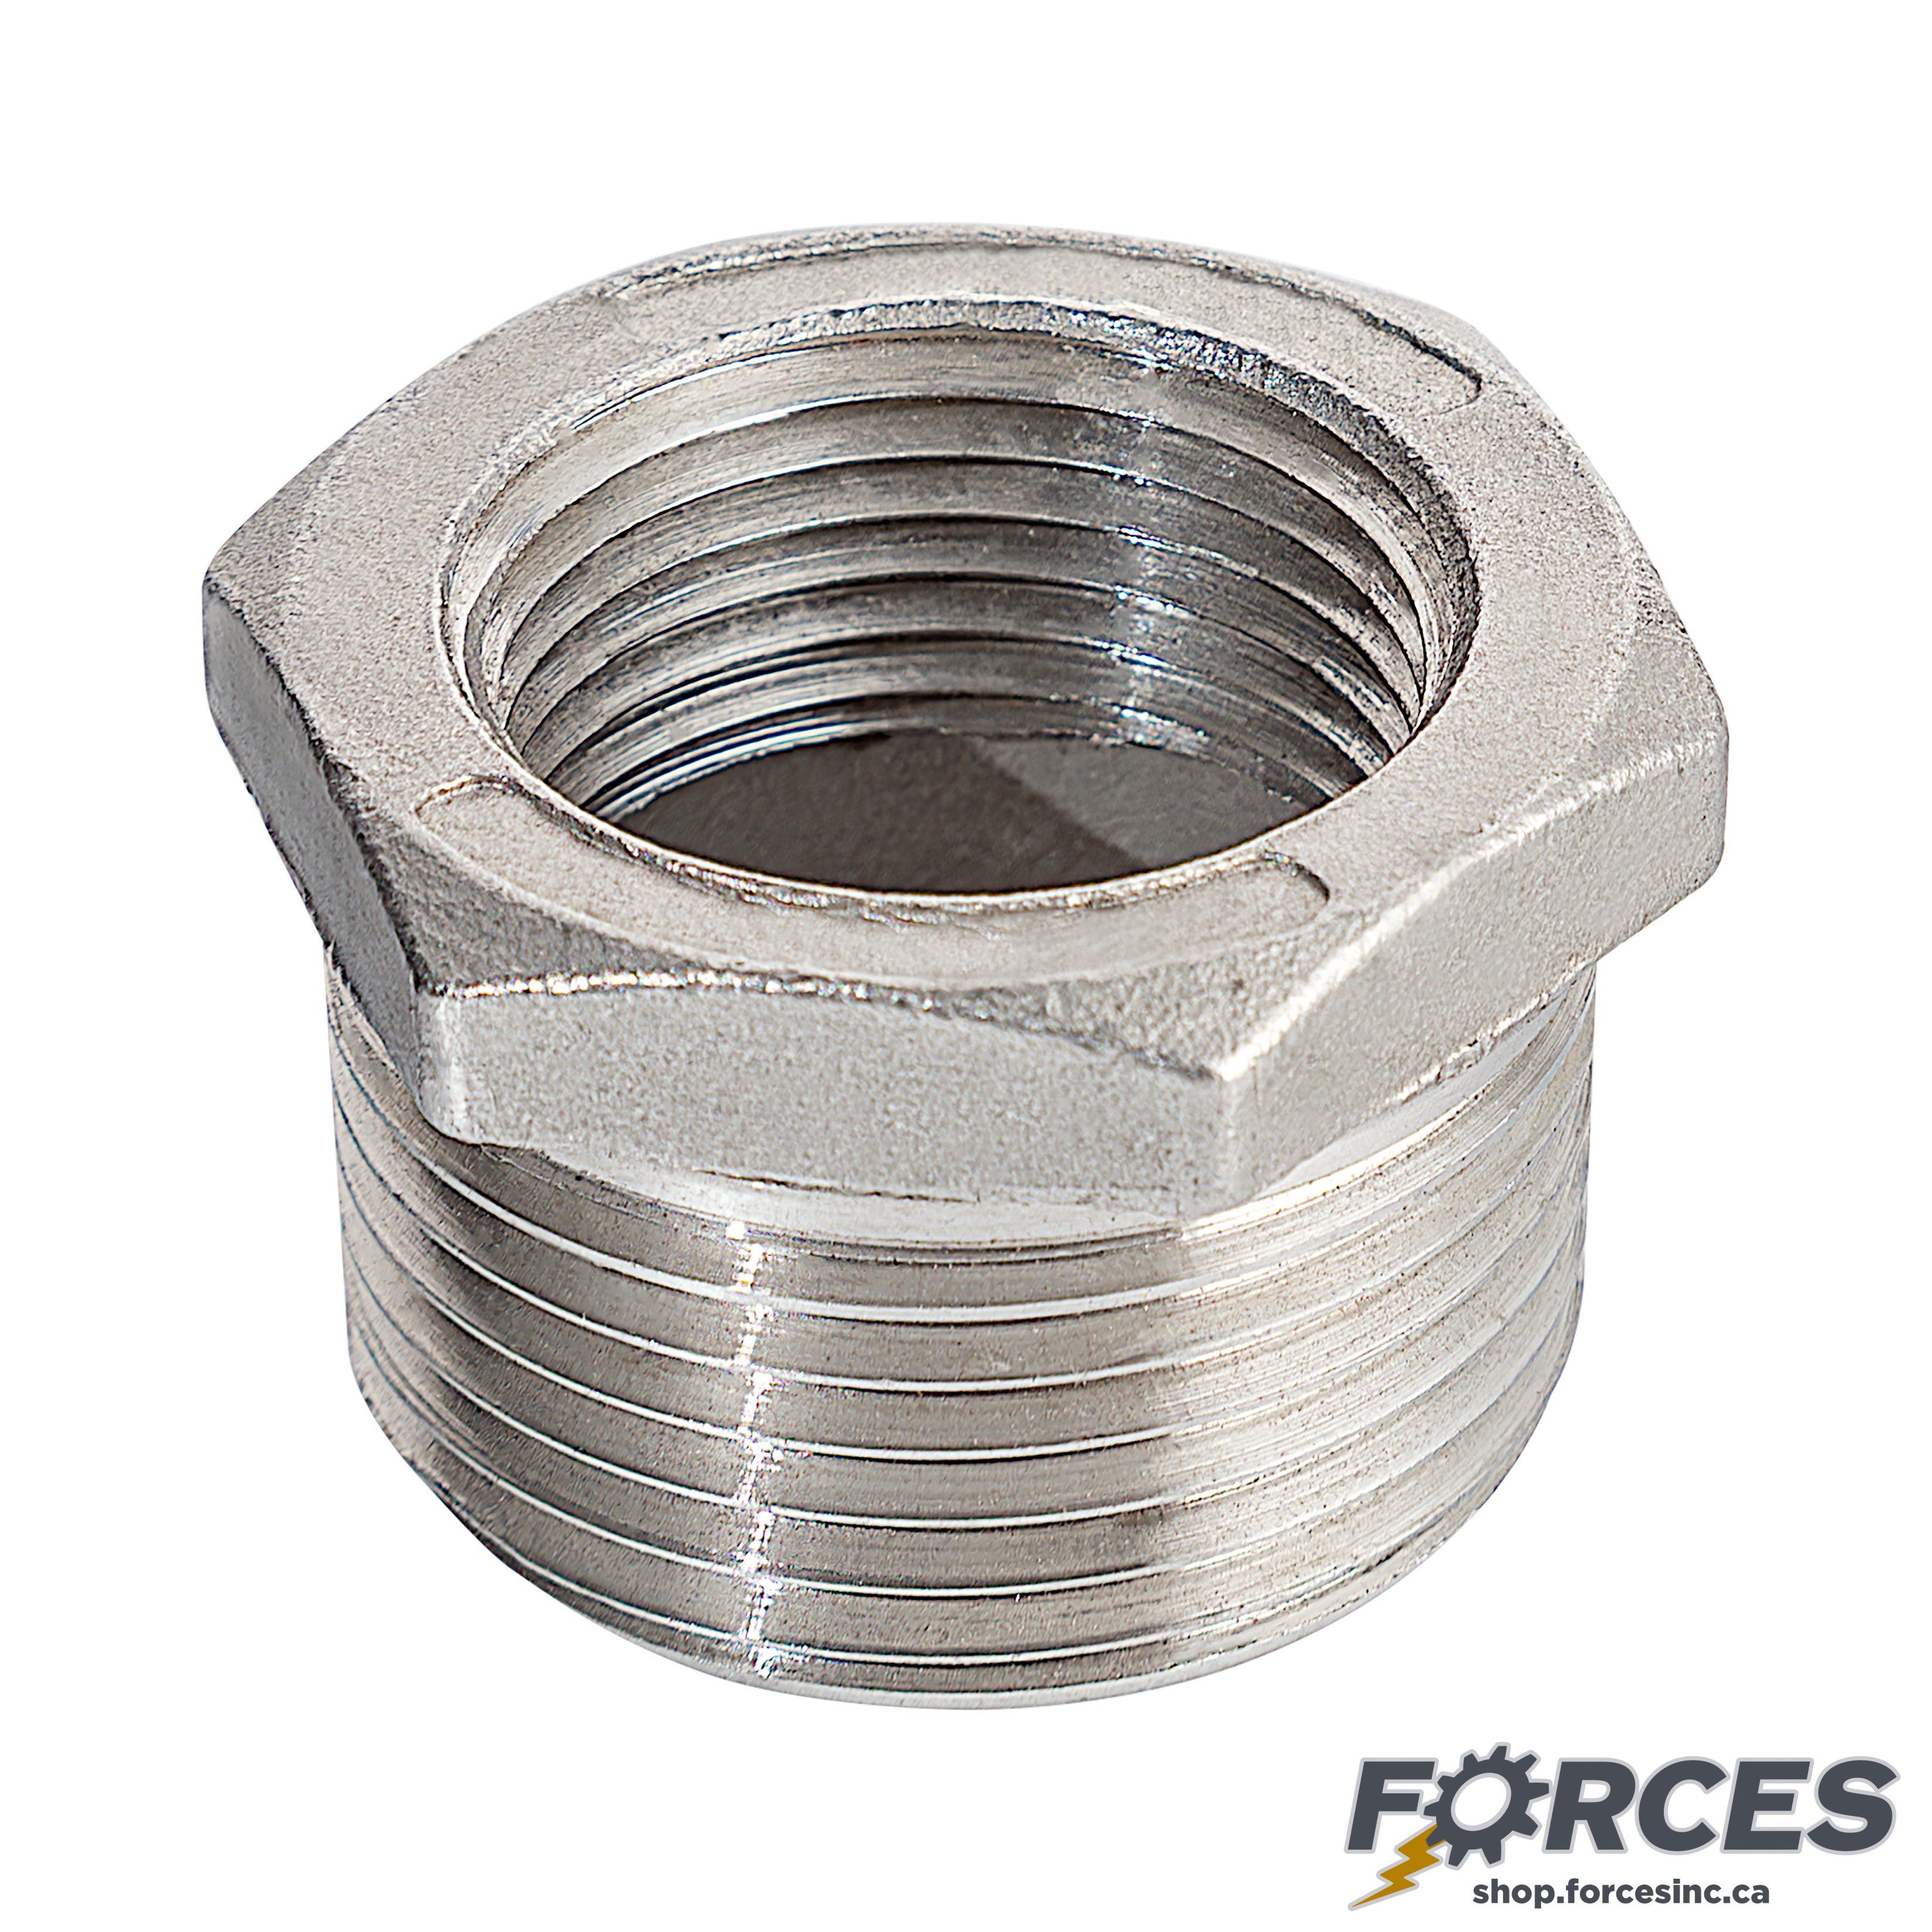 1-1/2" (M) x 1/4" (F) Reducing Hex Bushing NPT #150 - Stainless Steel 316 - Forces Inc